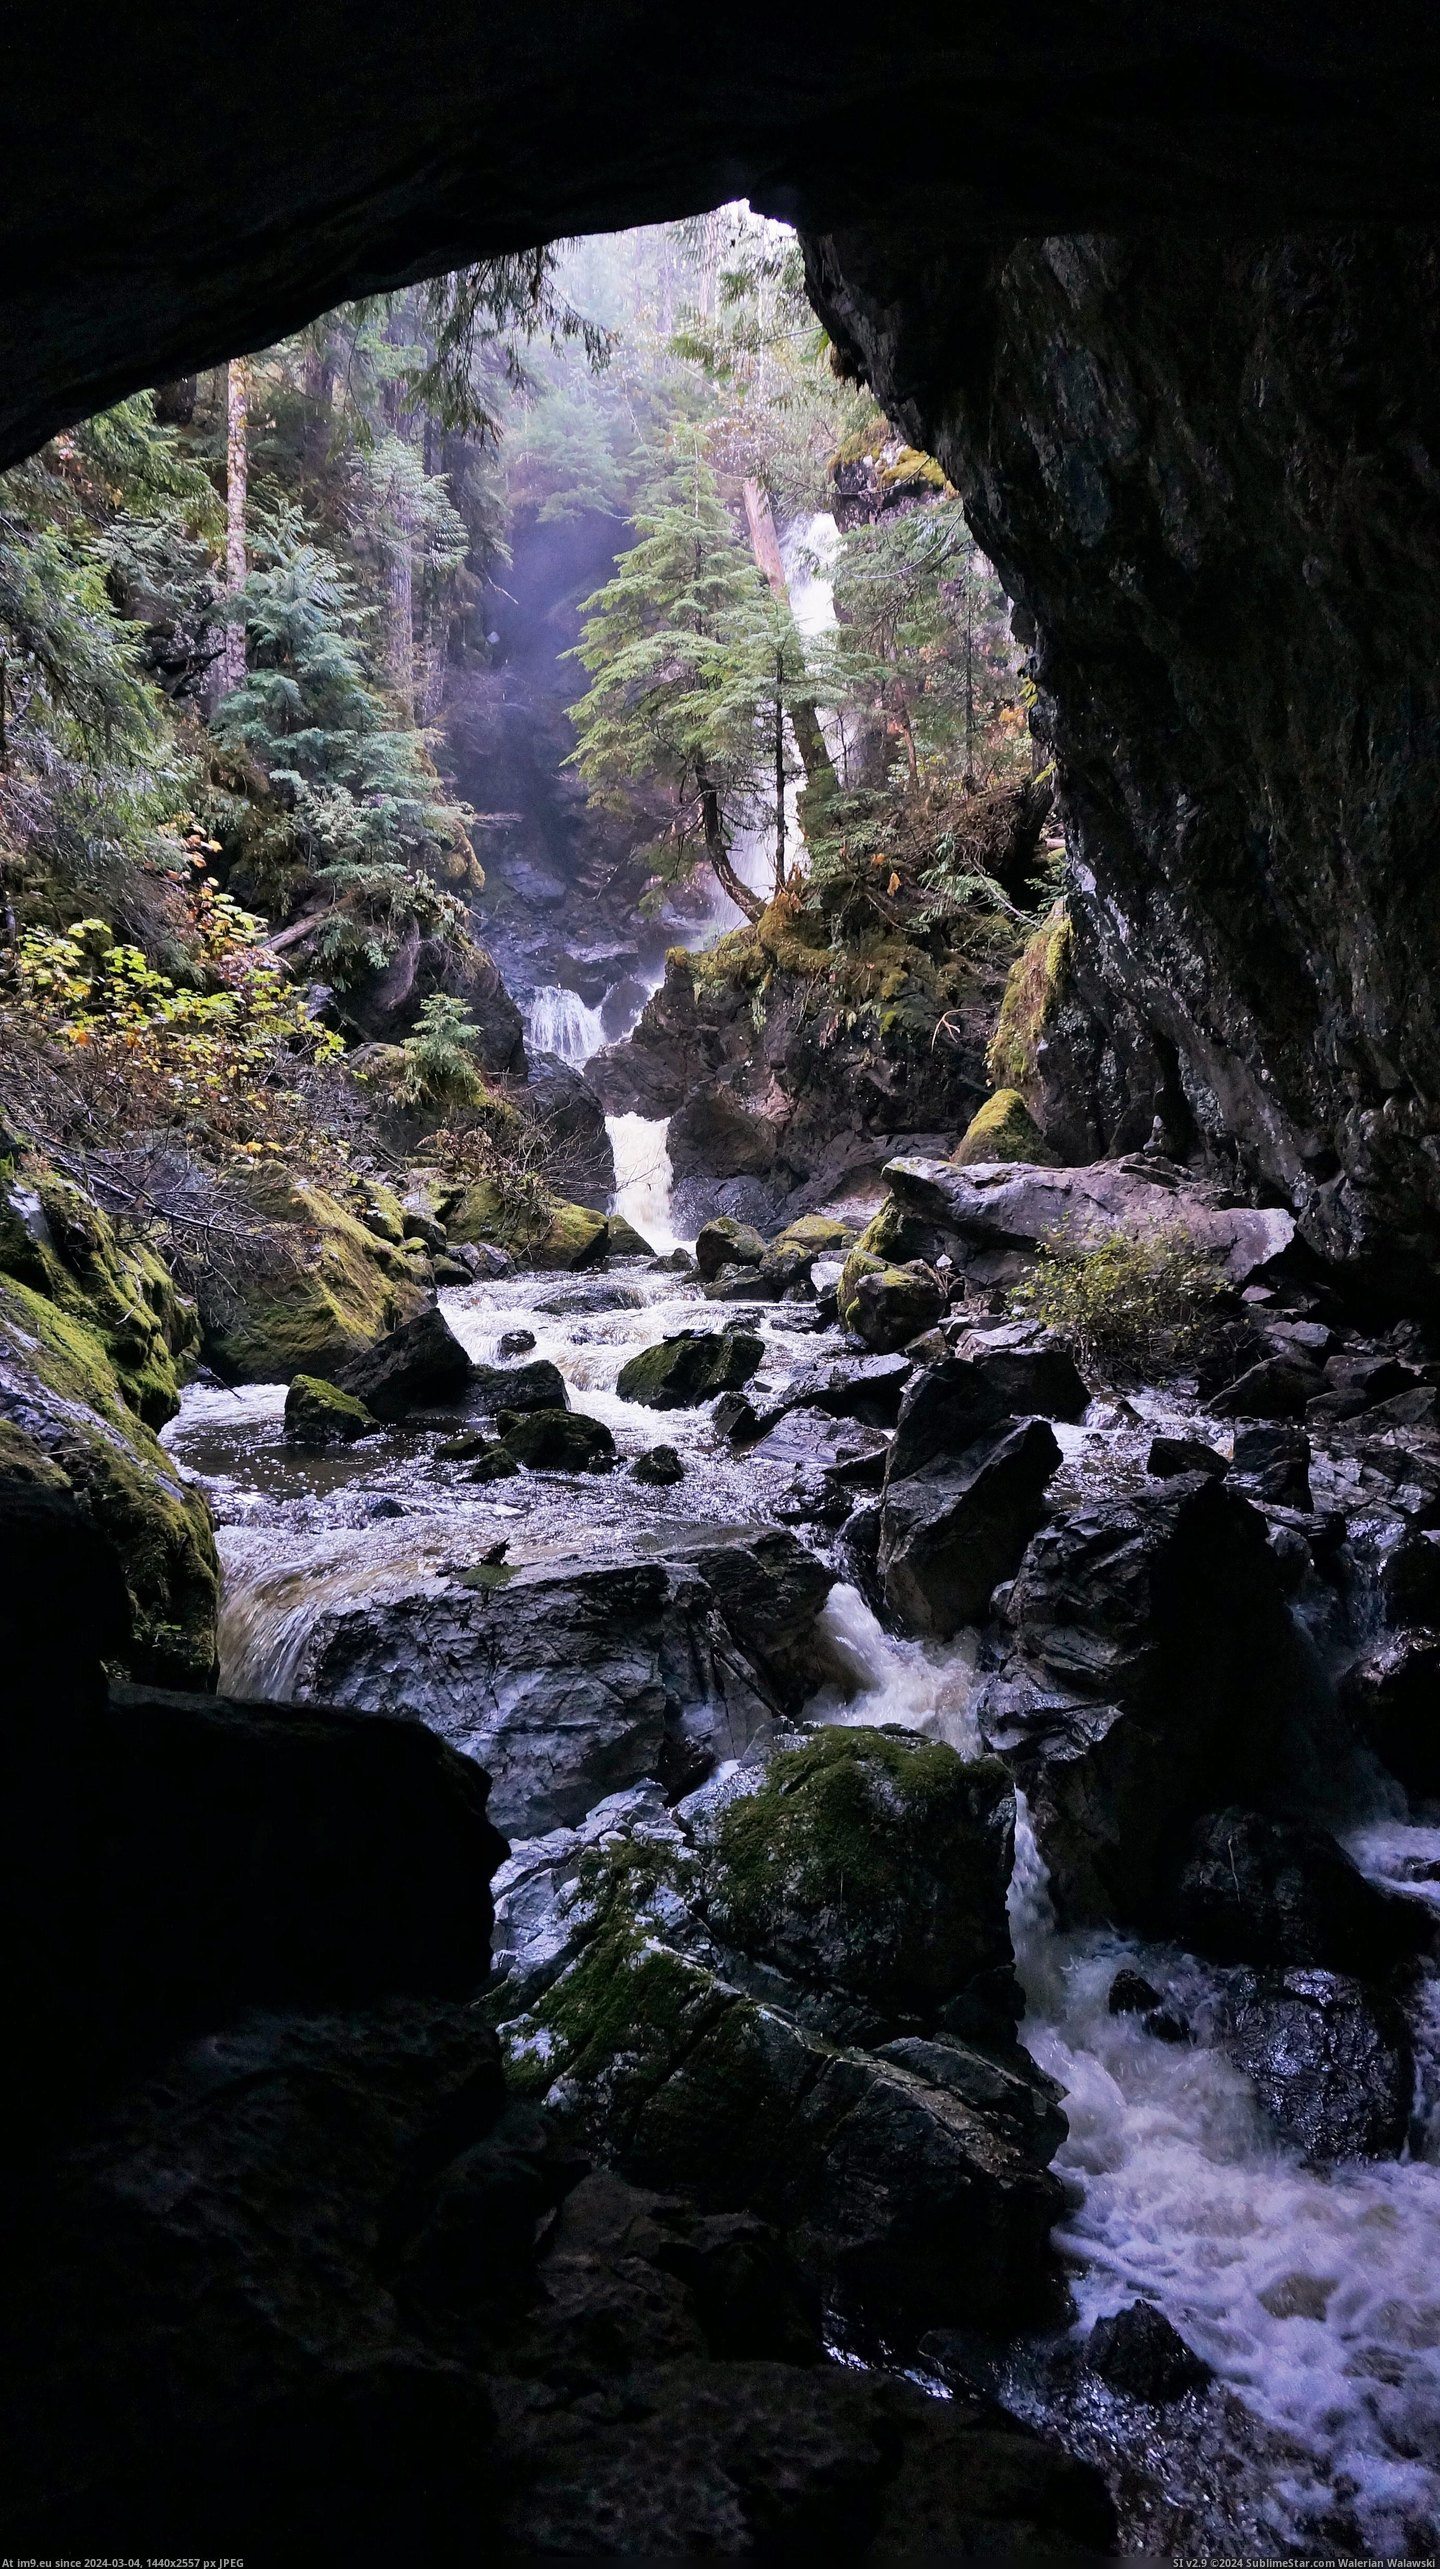 #River #Canada #Entrance #Upana #Gold #Cave [Earthporn] Looking out of the entrance to Upana Cave - Gold River, BC, Canada (OC)(2760x4912) Pic. (Изображение из альбом My r/EARTHPORN favs))